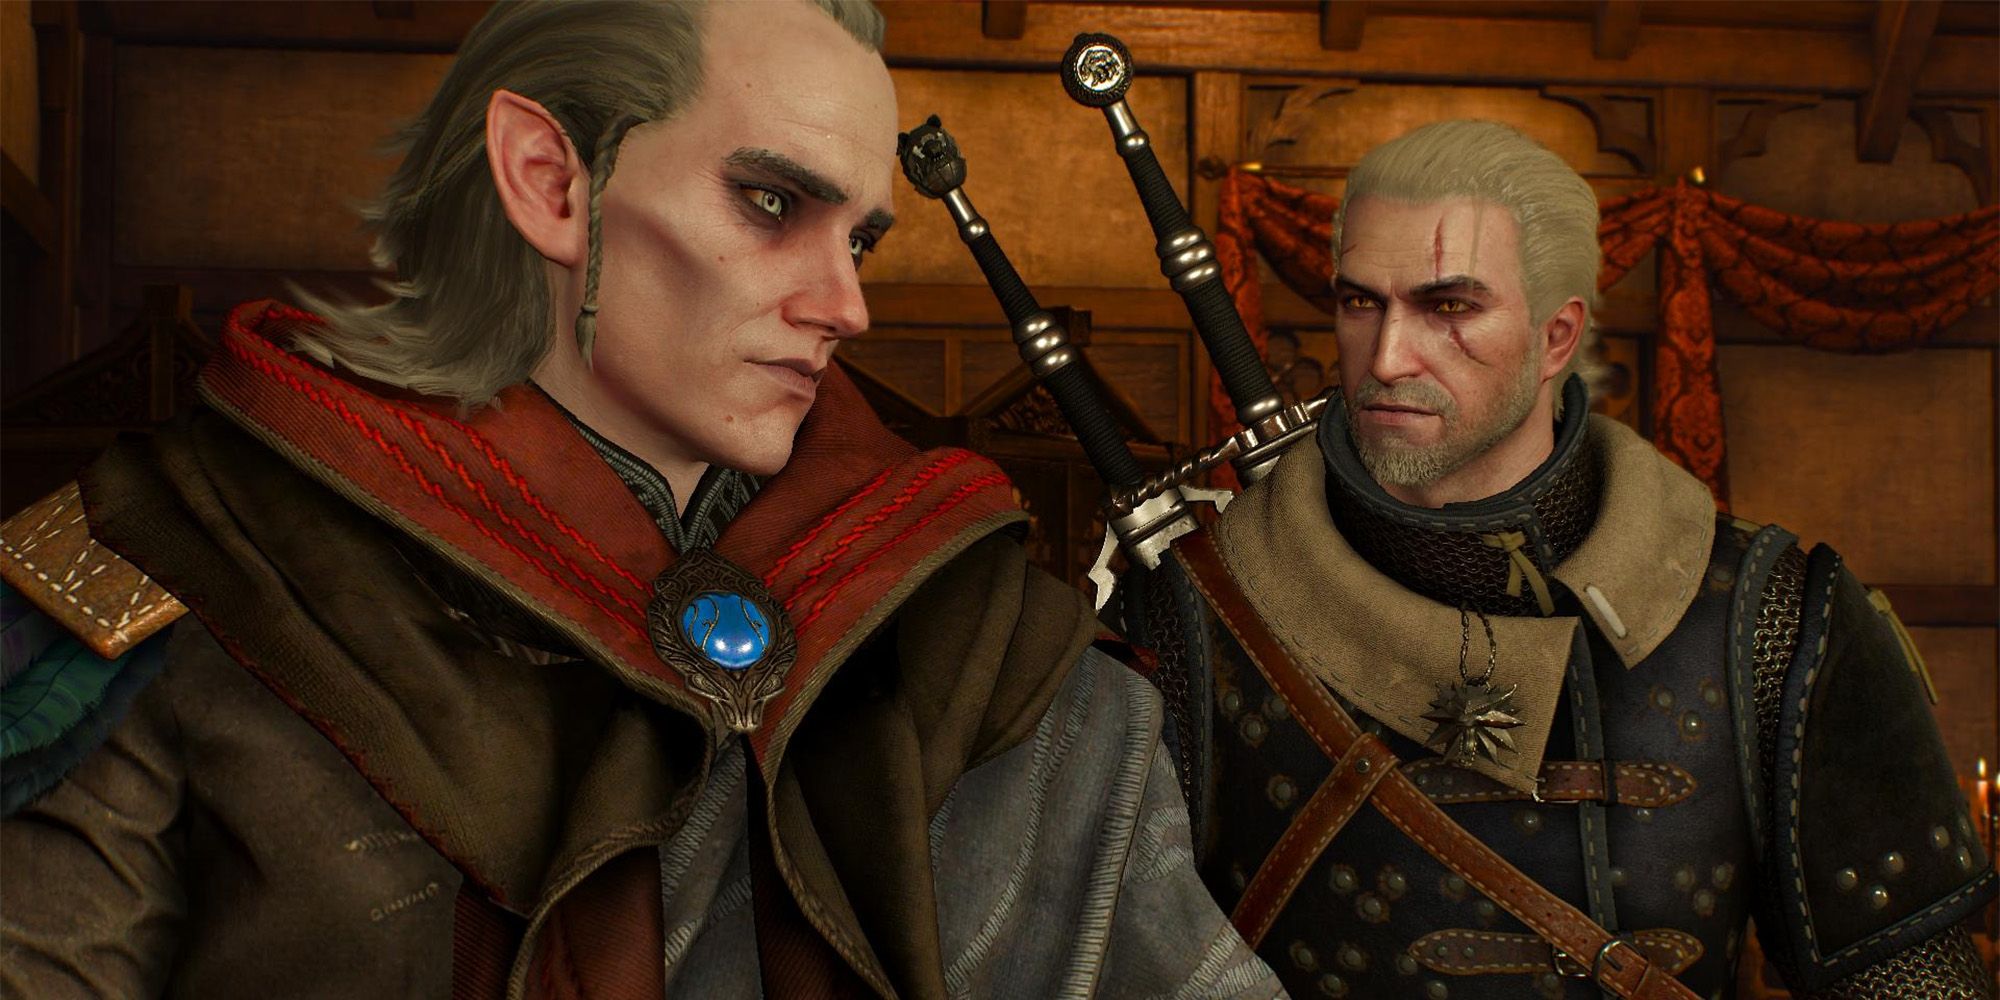 The Witcher 3 Avallac'h and Geralt